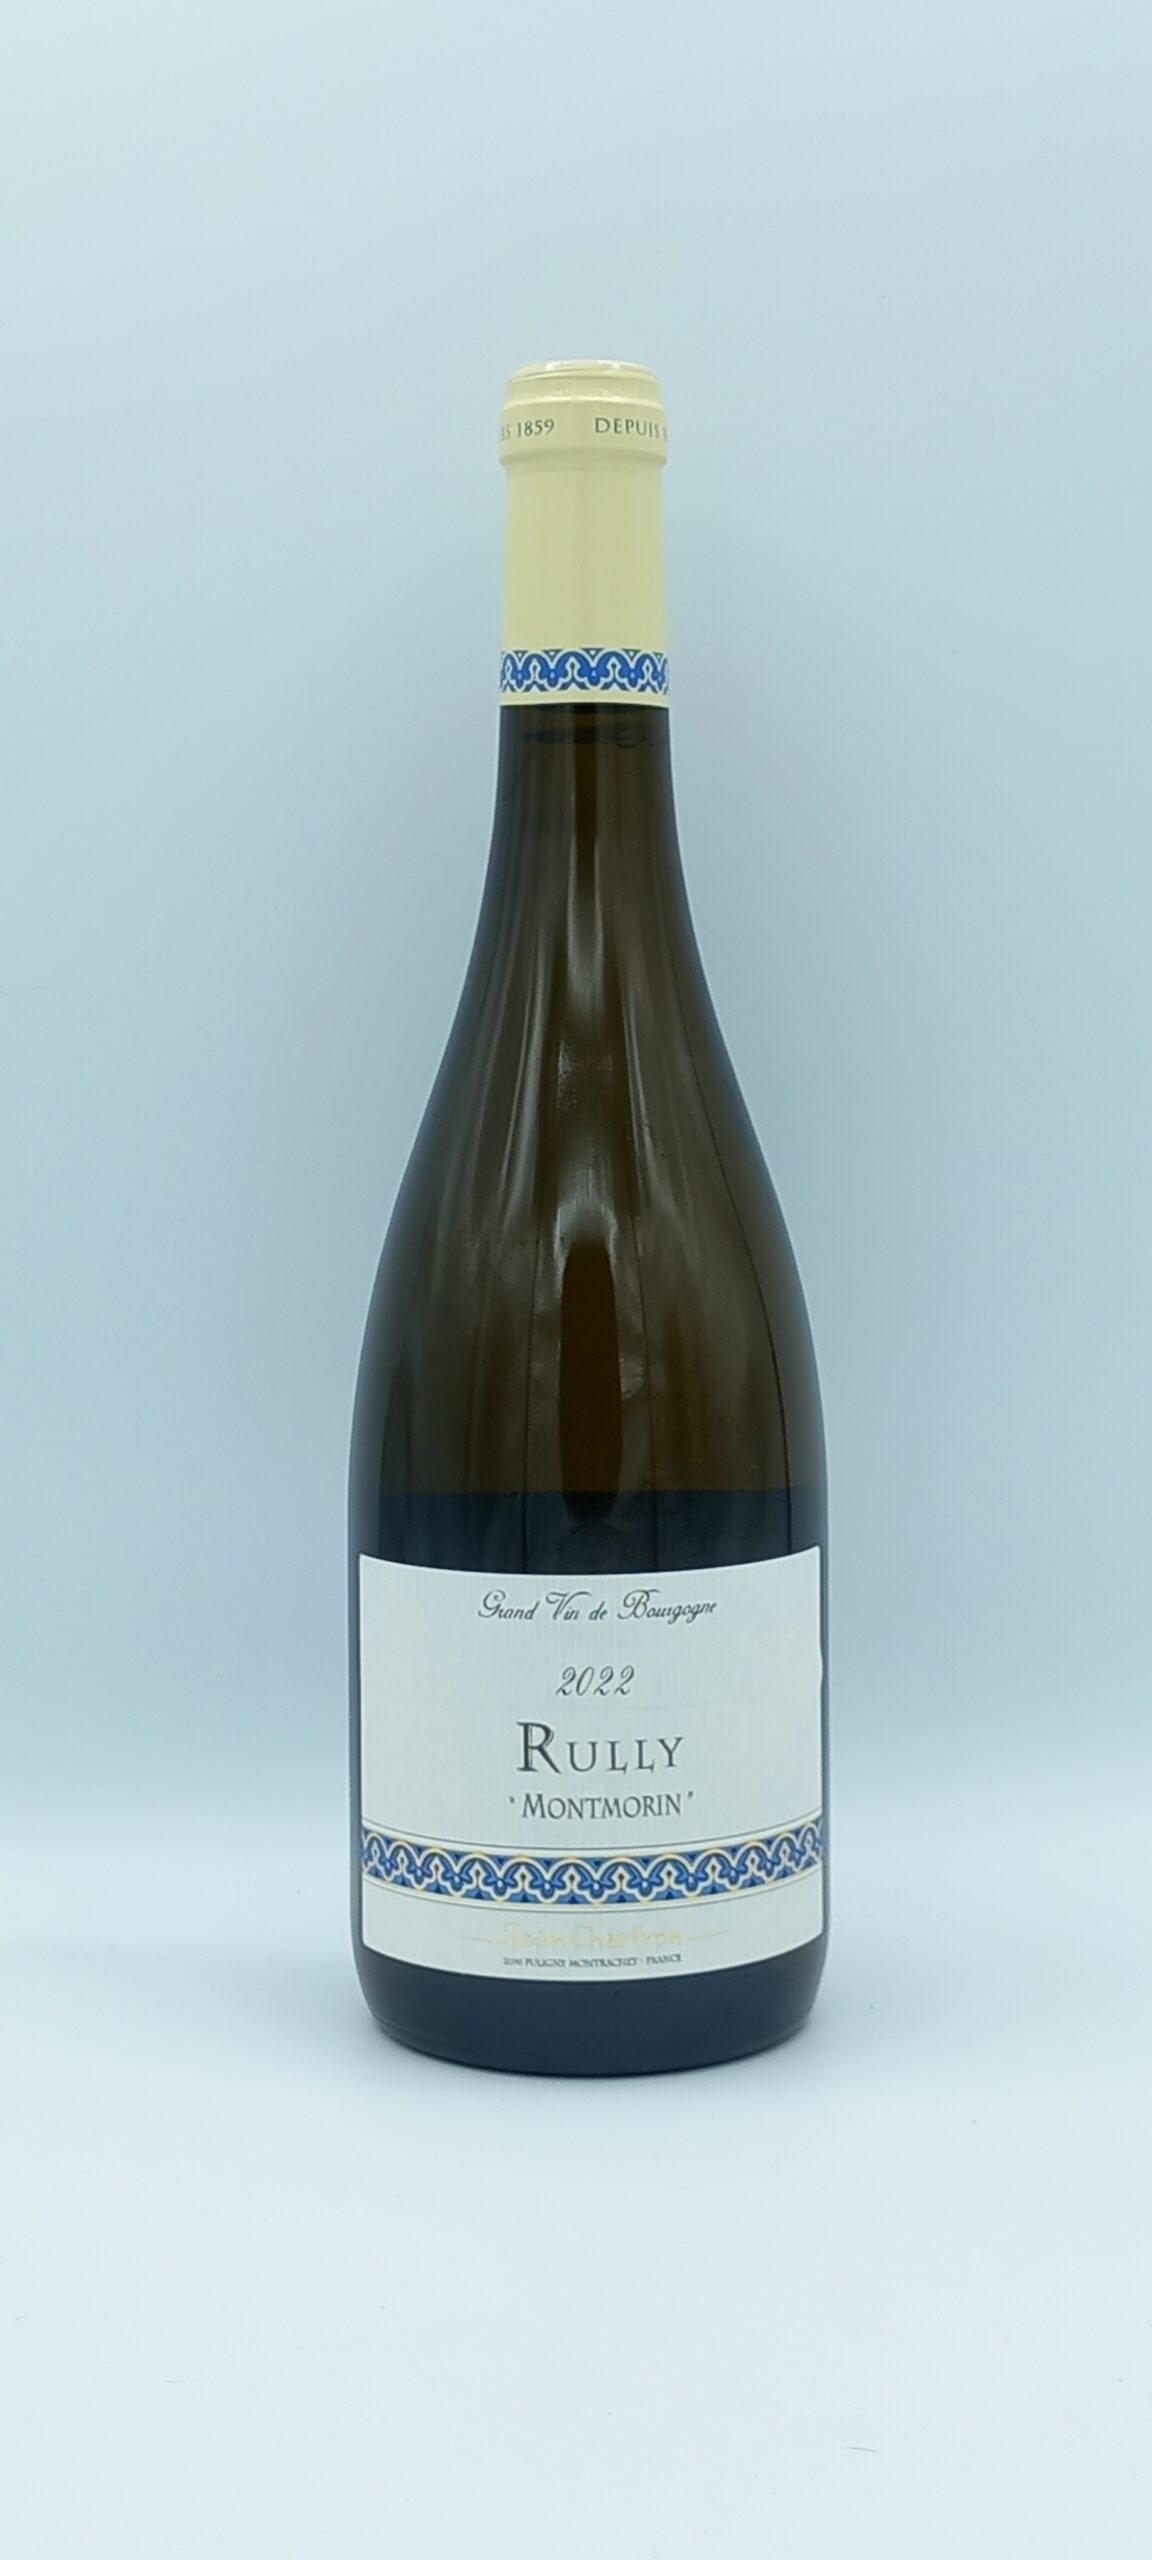 Bourgogne Rully “Montmorin” 2022 Domaine Jean Chartron